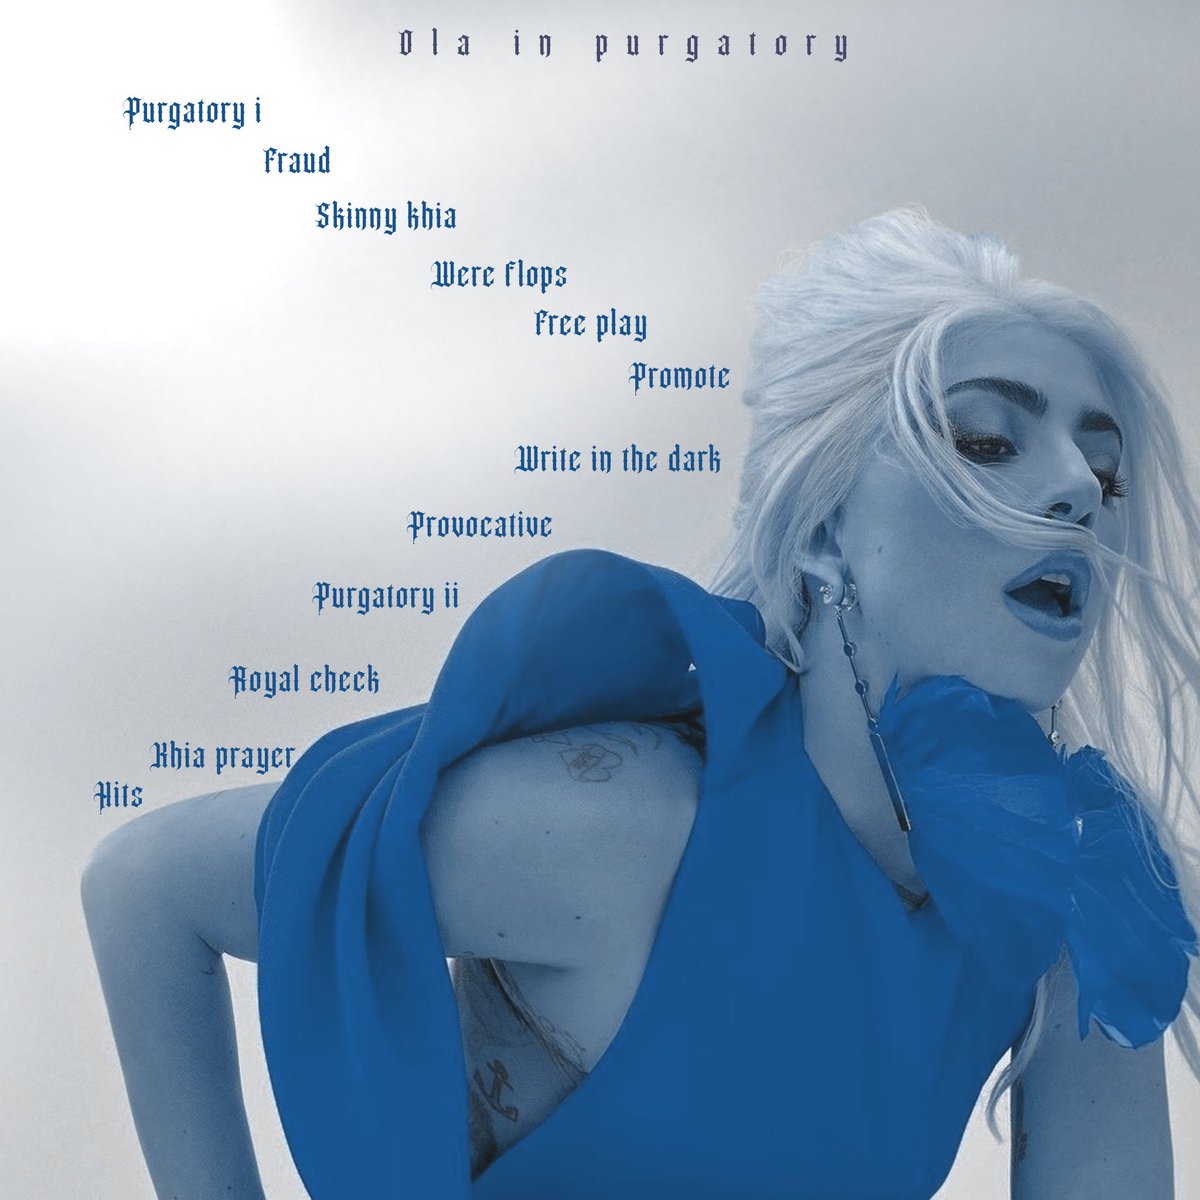 Surprise!? Well we already knew but… my new album OLA IN PURGATORY, officially comes out on June 13th! Here’s the tracklist to it! I hope you enjoy it as it took me 3 months to master it💙♠️🃏I the meantime go stream the tracks we already have from it ⬇️